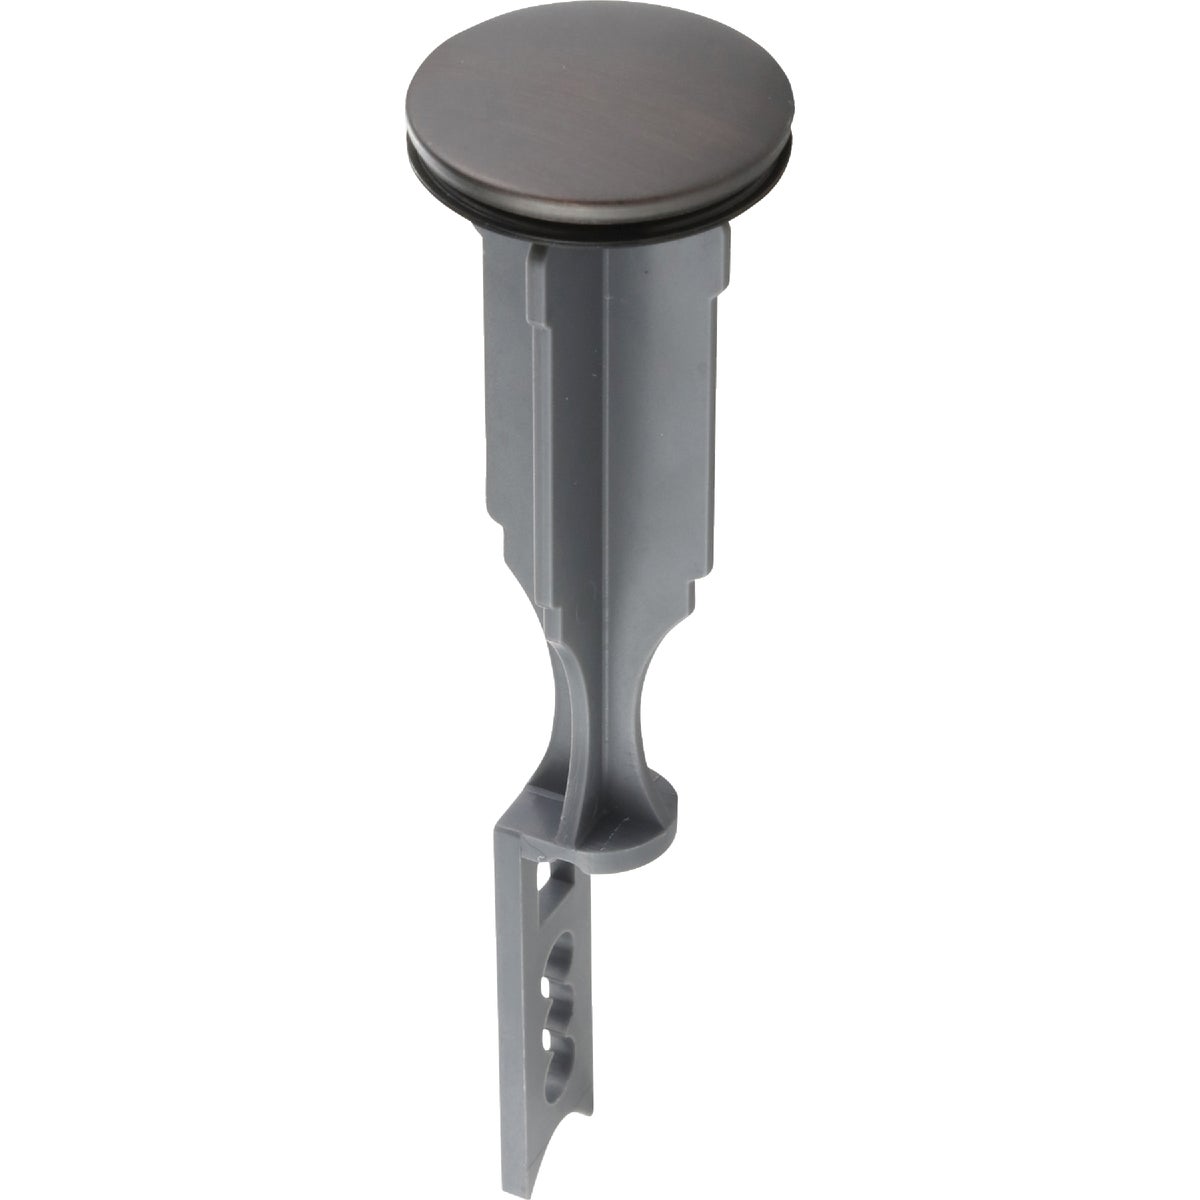 Item 404571, The Danco Bathroom Sink Pop-up Stopper is the perfect replacement for your 